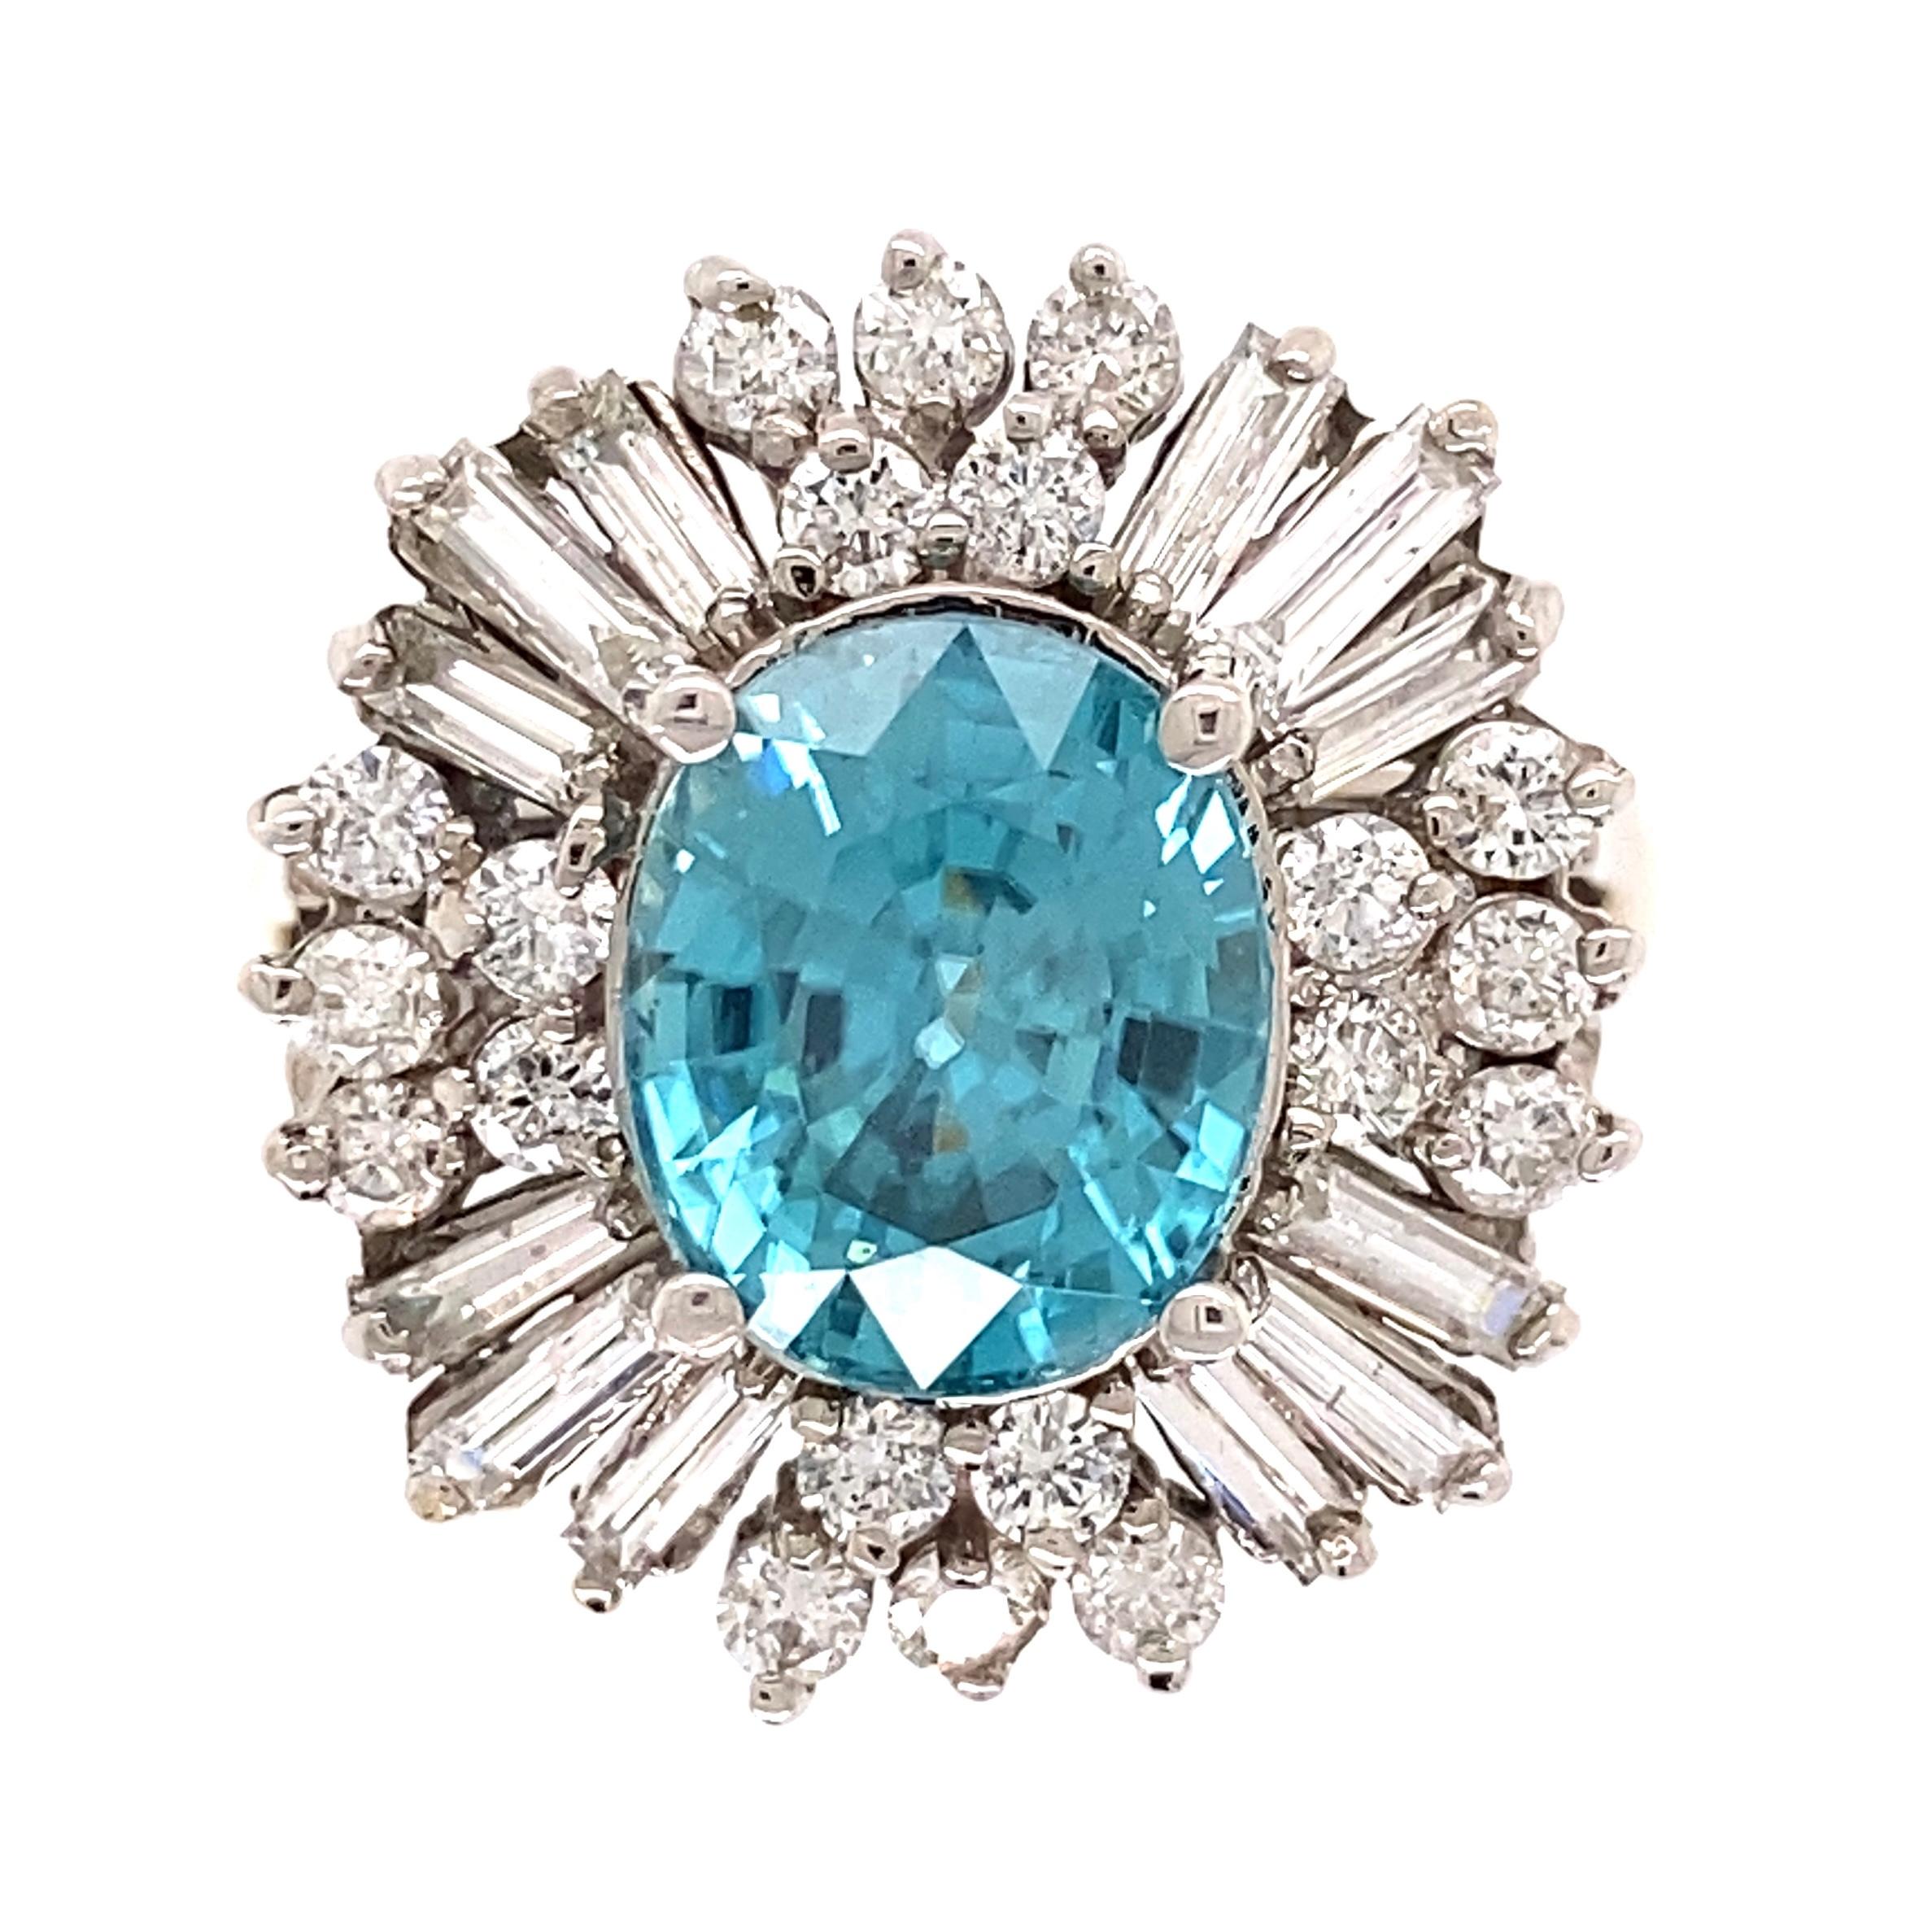 Mixed Cut 4.50 Carat Blue Zircon and Diamond Cocktail Ring Estate Fine Jewelry For Sale